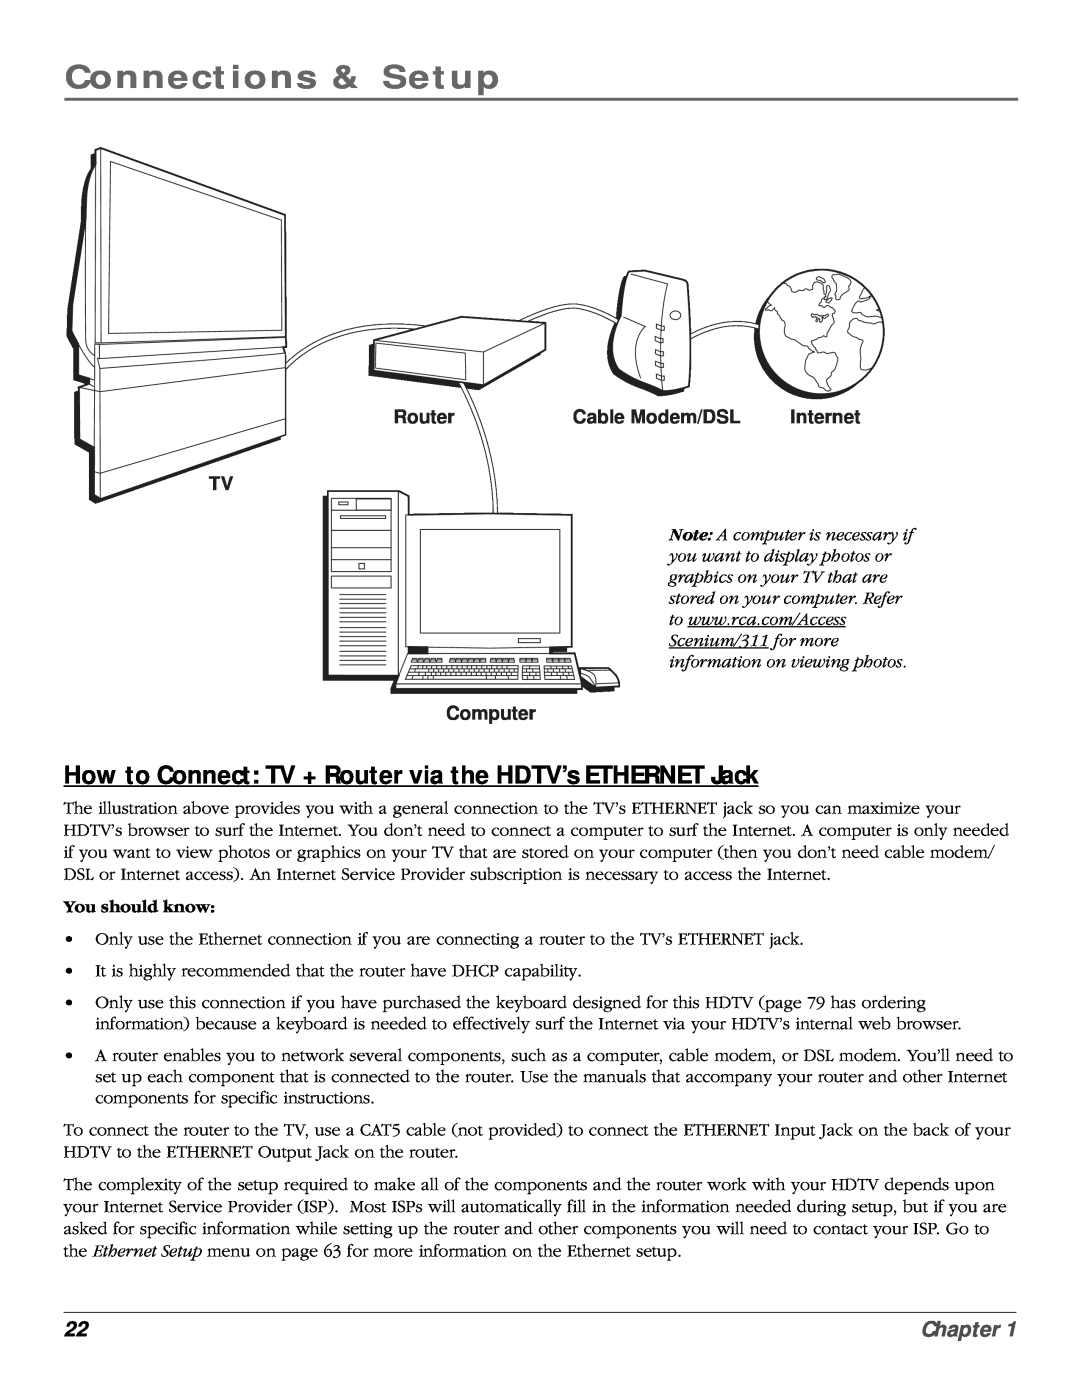 RCA scenium manual How to Connect TV + Router via the HDTV’s ETHERNET Jack, You should know, Connections & Setup, Chapter 